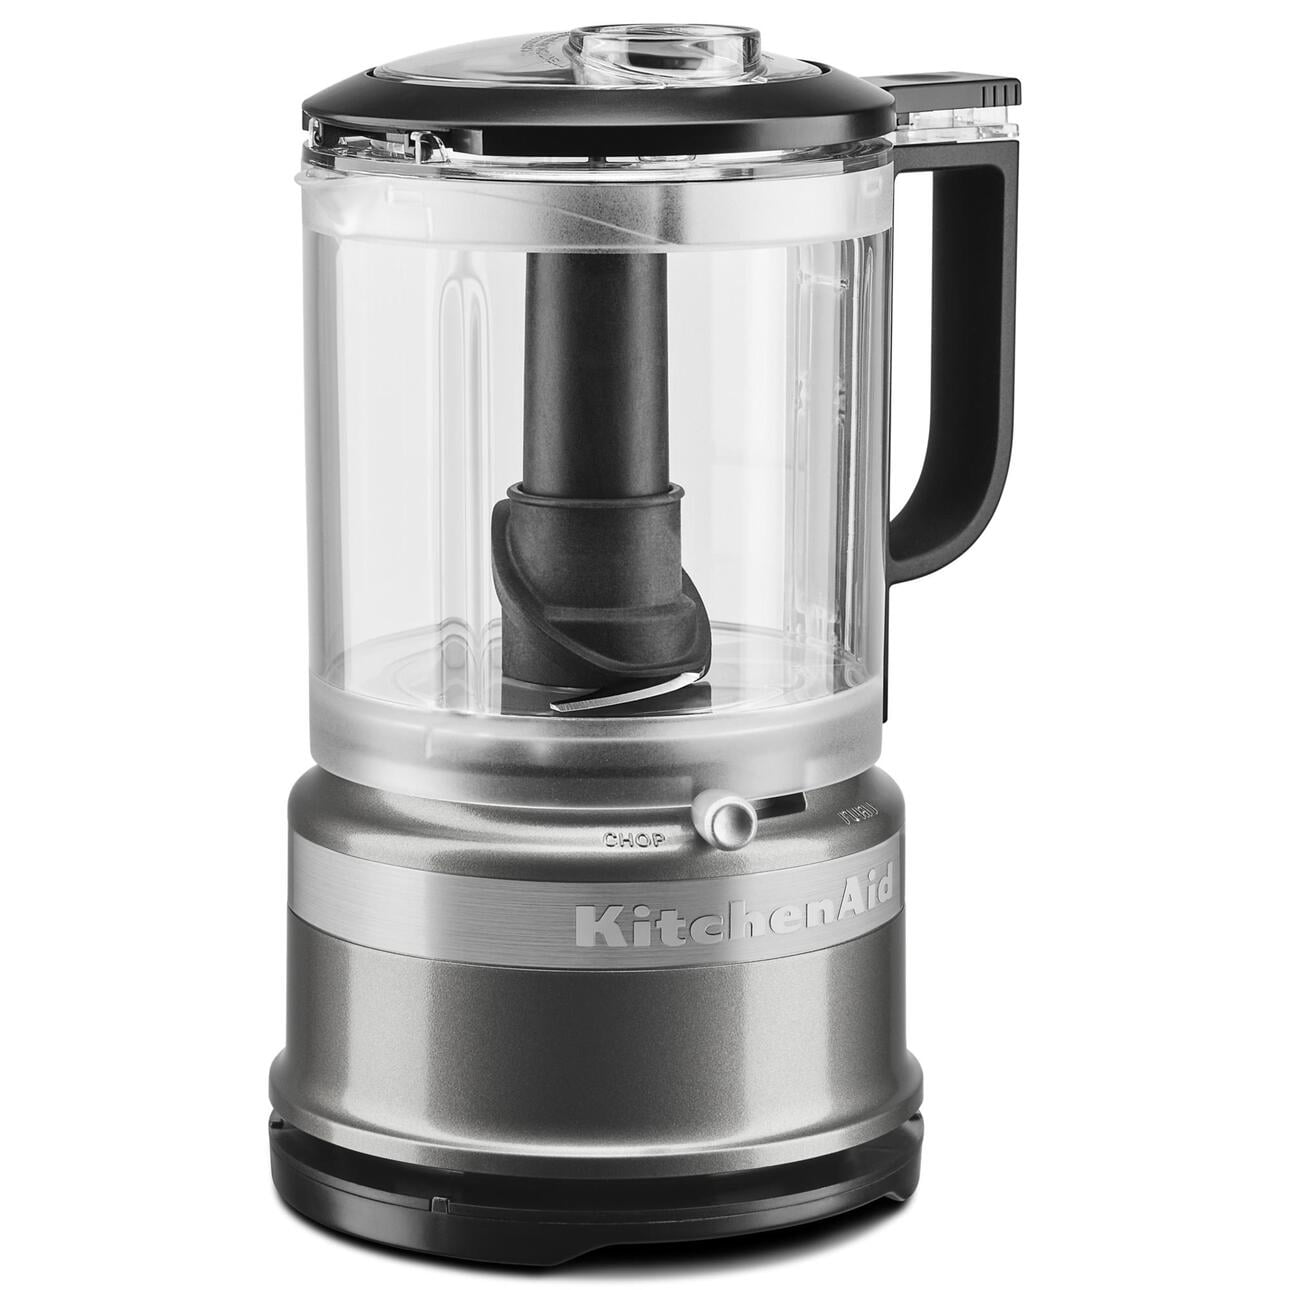 Linkchef Food Chopper Electric, 5 Cup Mini Food Processor Stainless Steel,  Small